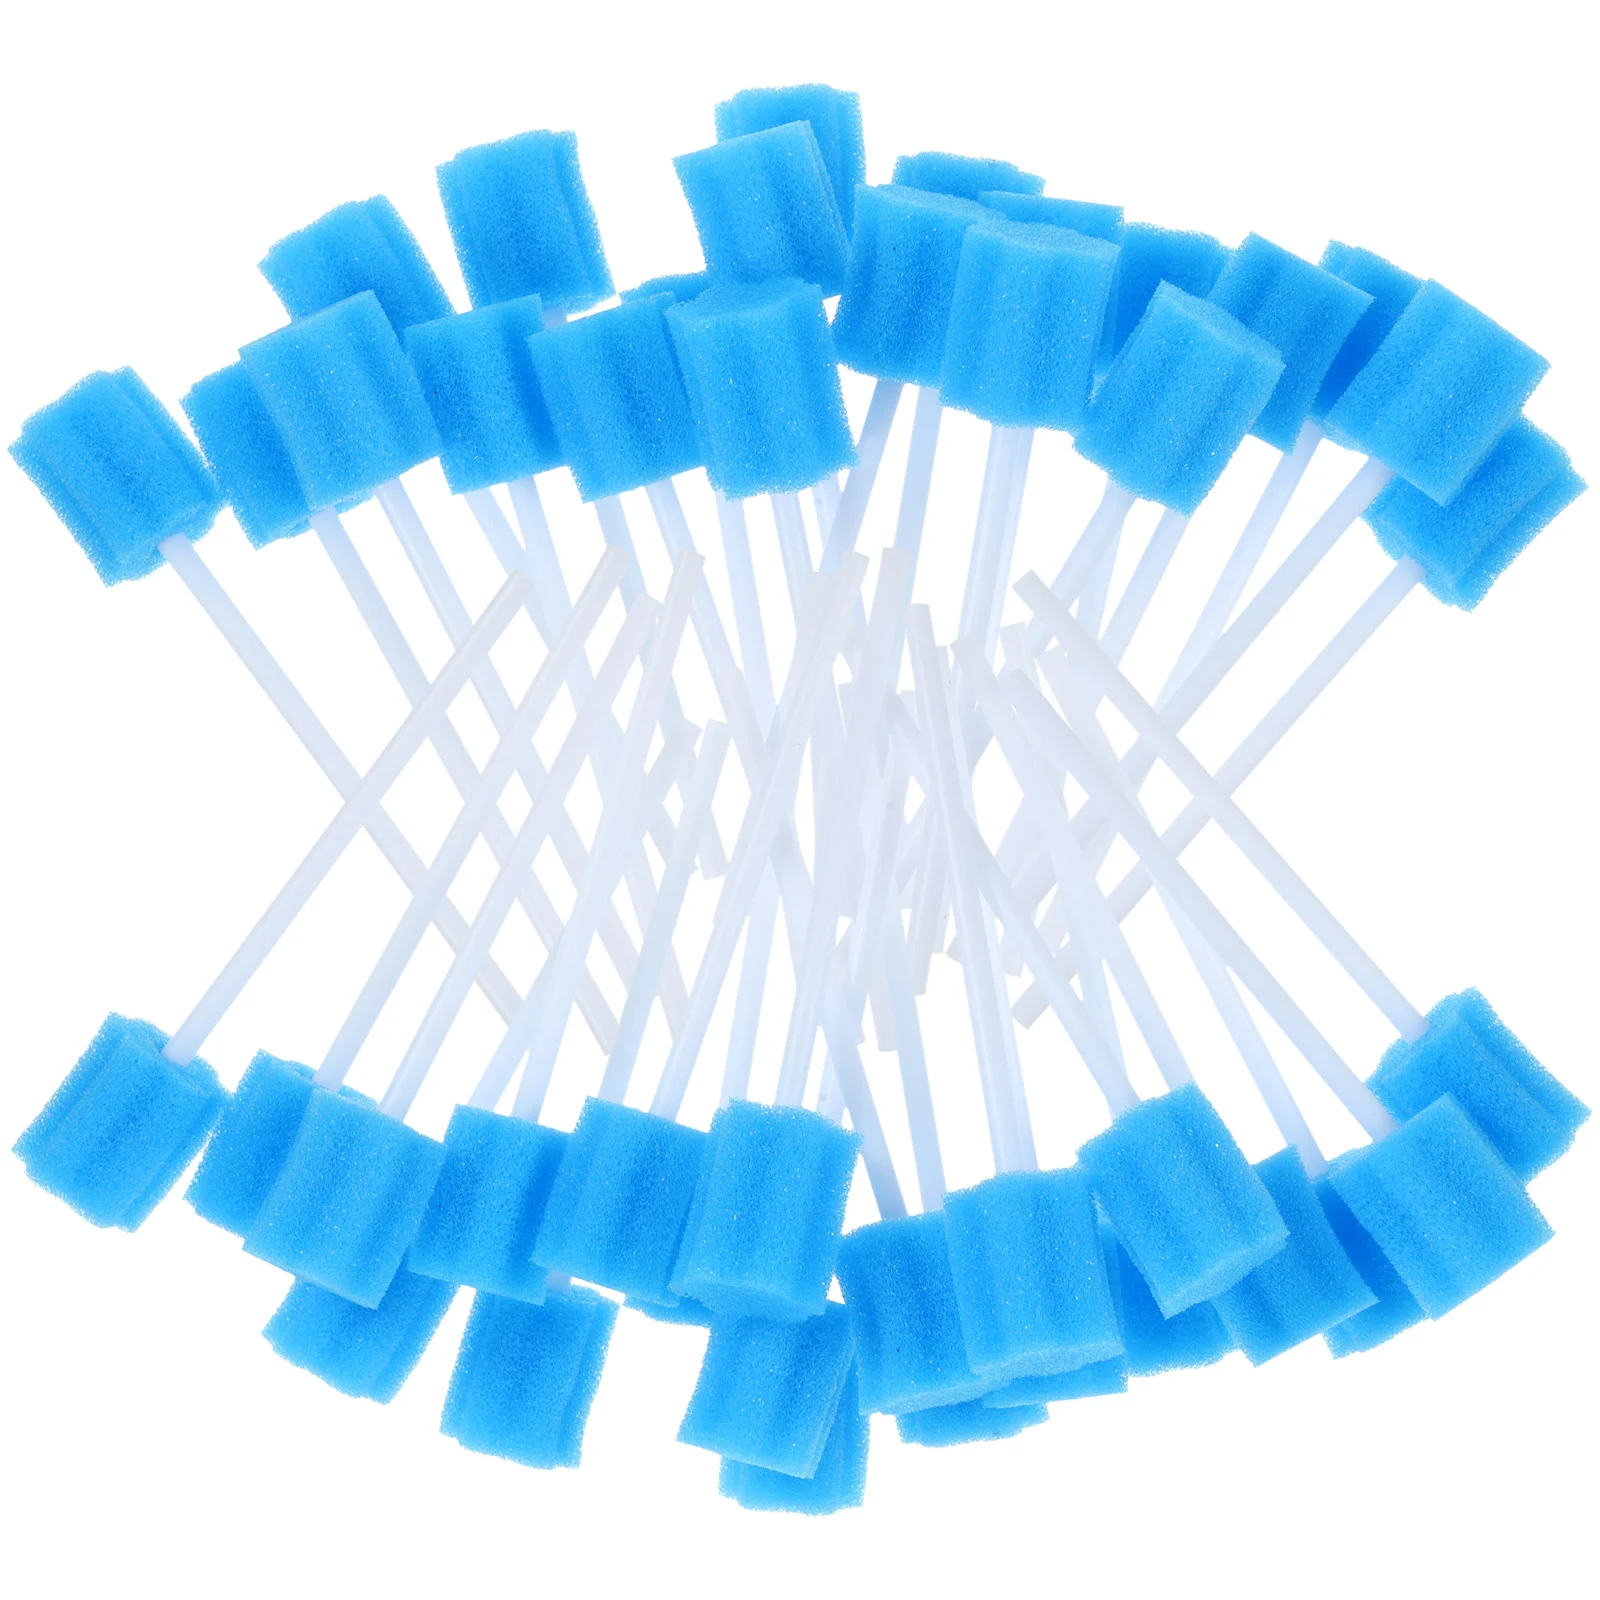 

100PCS Care Swabs Mouth Cleaning Mouth Cleaner Sponge Supplies for Adults Kids Senior Blue Isopropylic alchohol